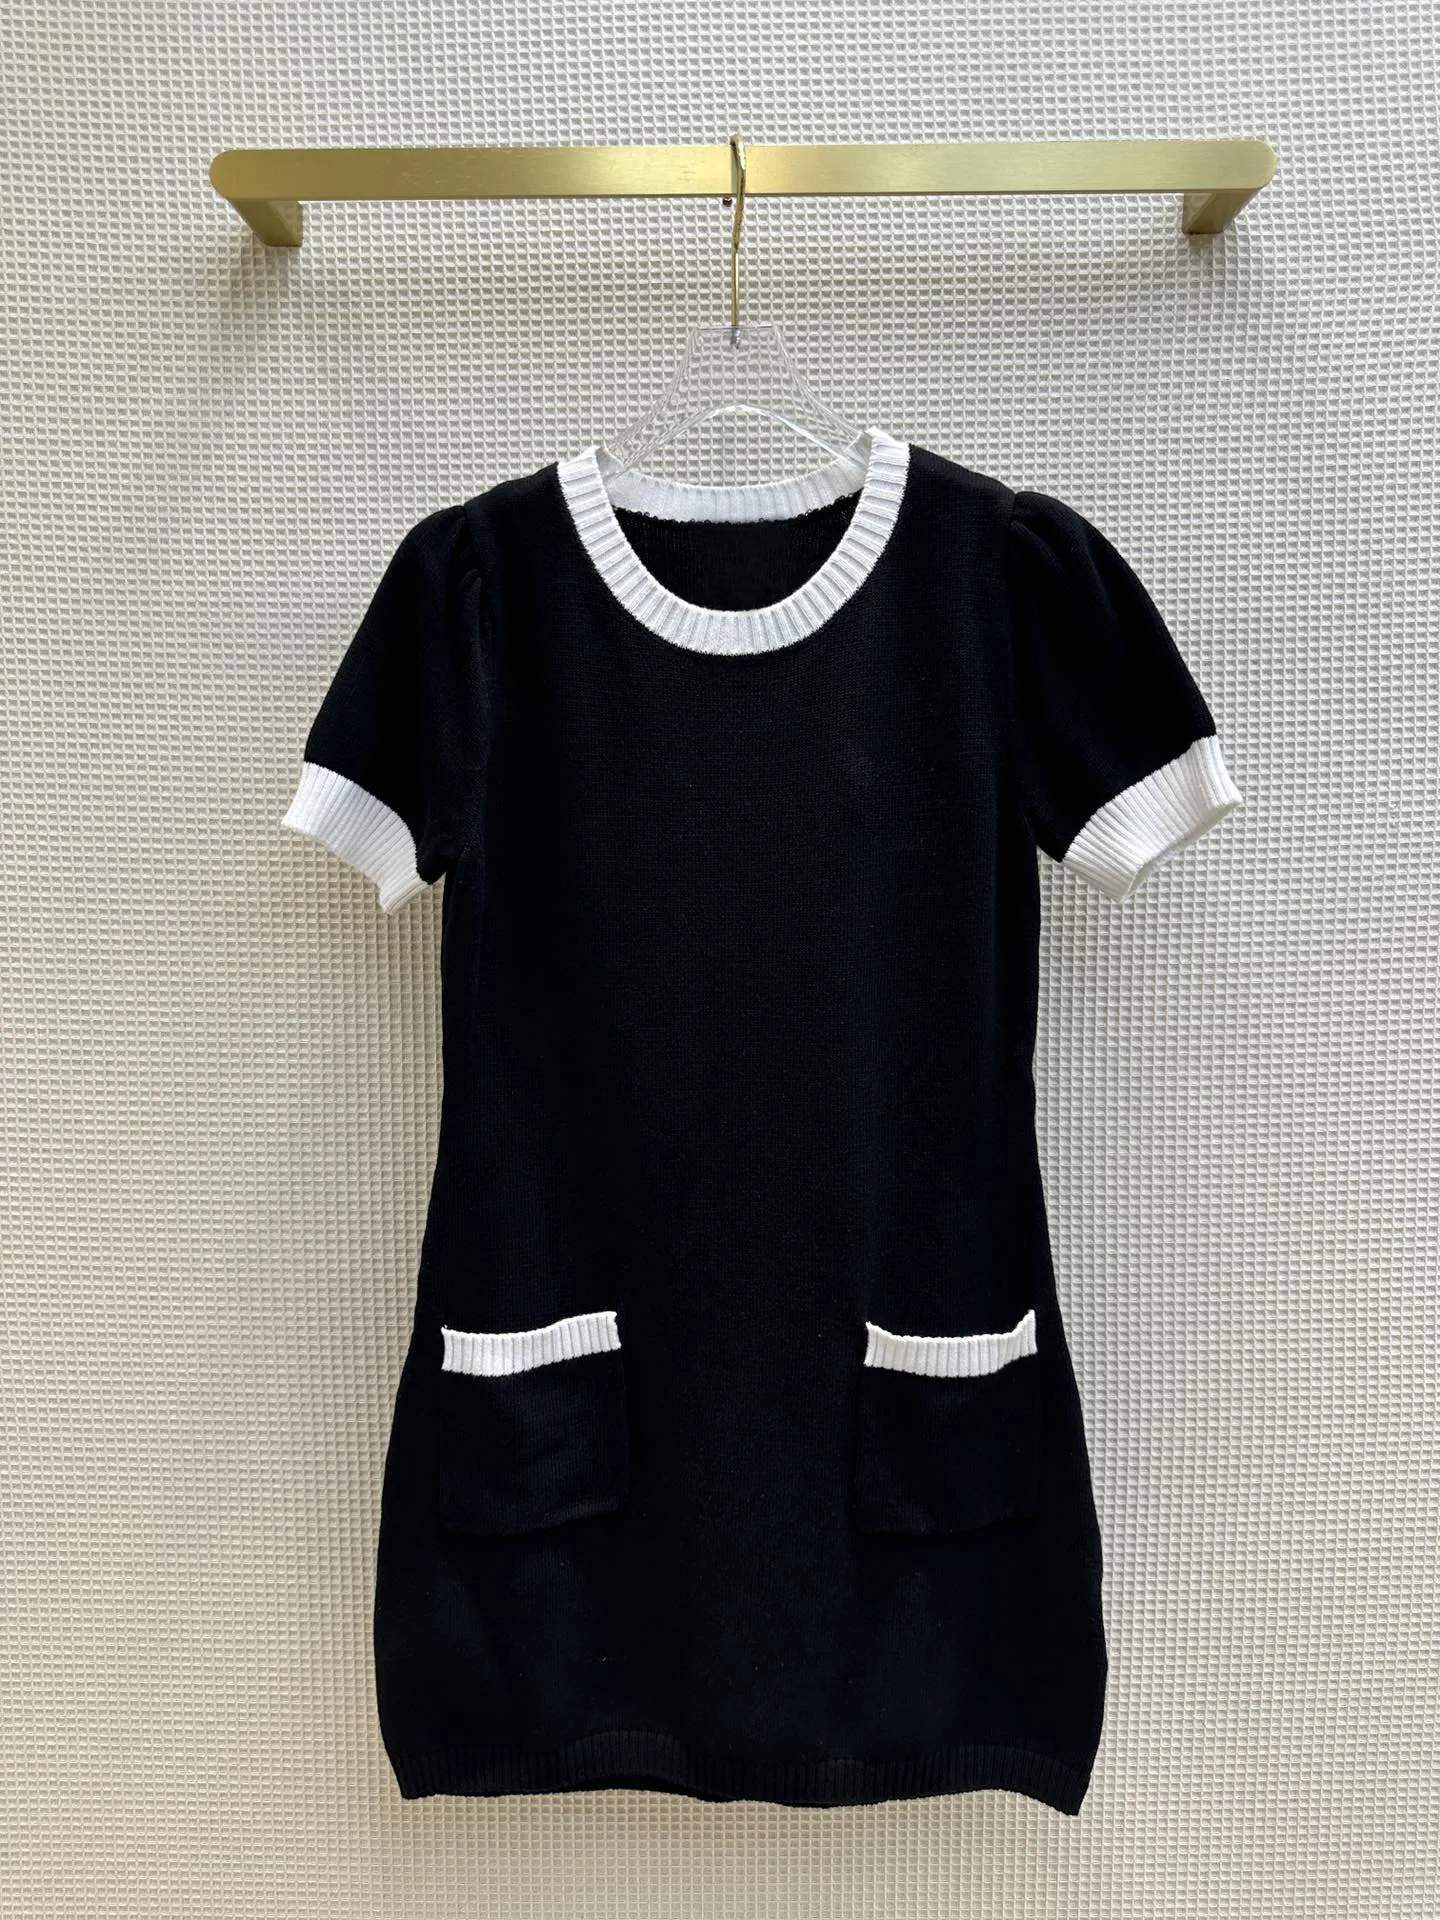 The new black and white knitted dress for spring and summer is classic and fashionable